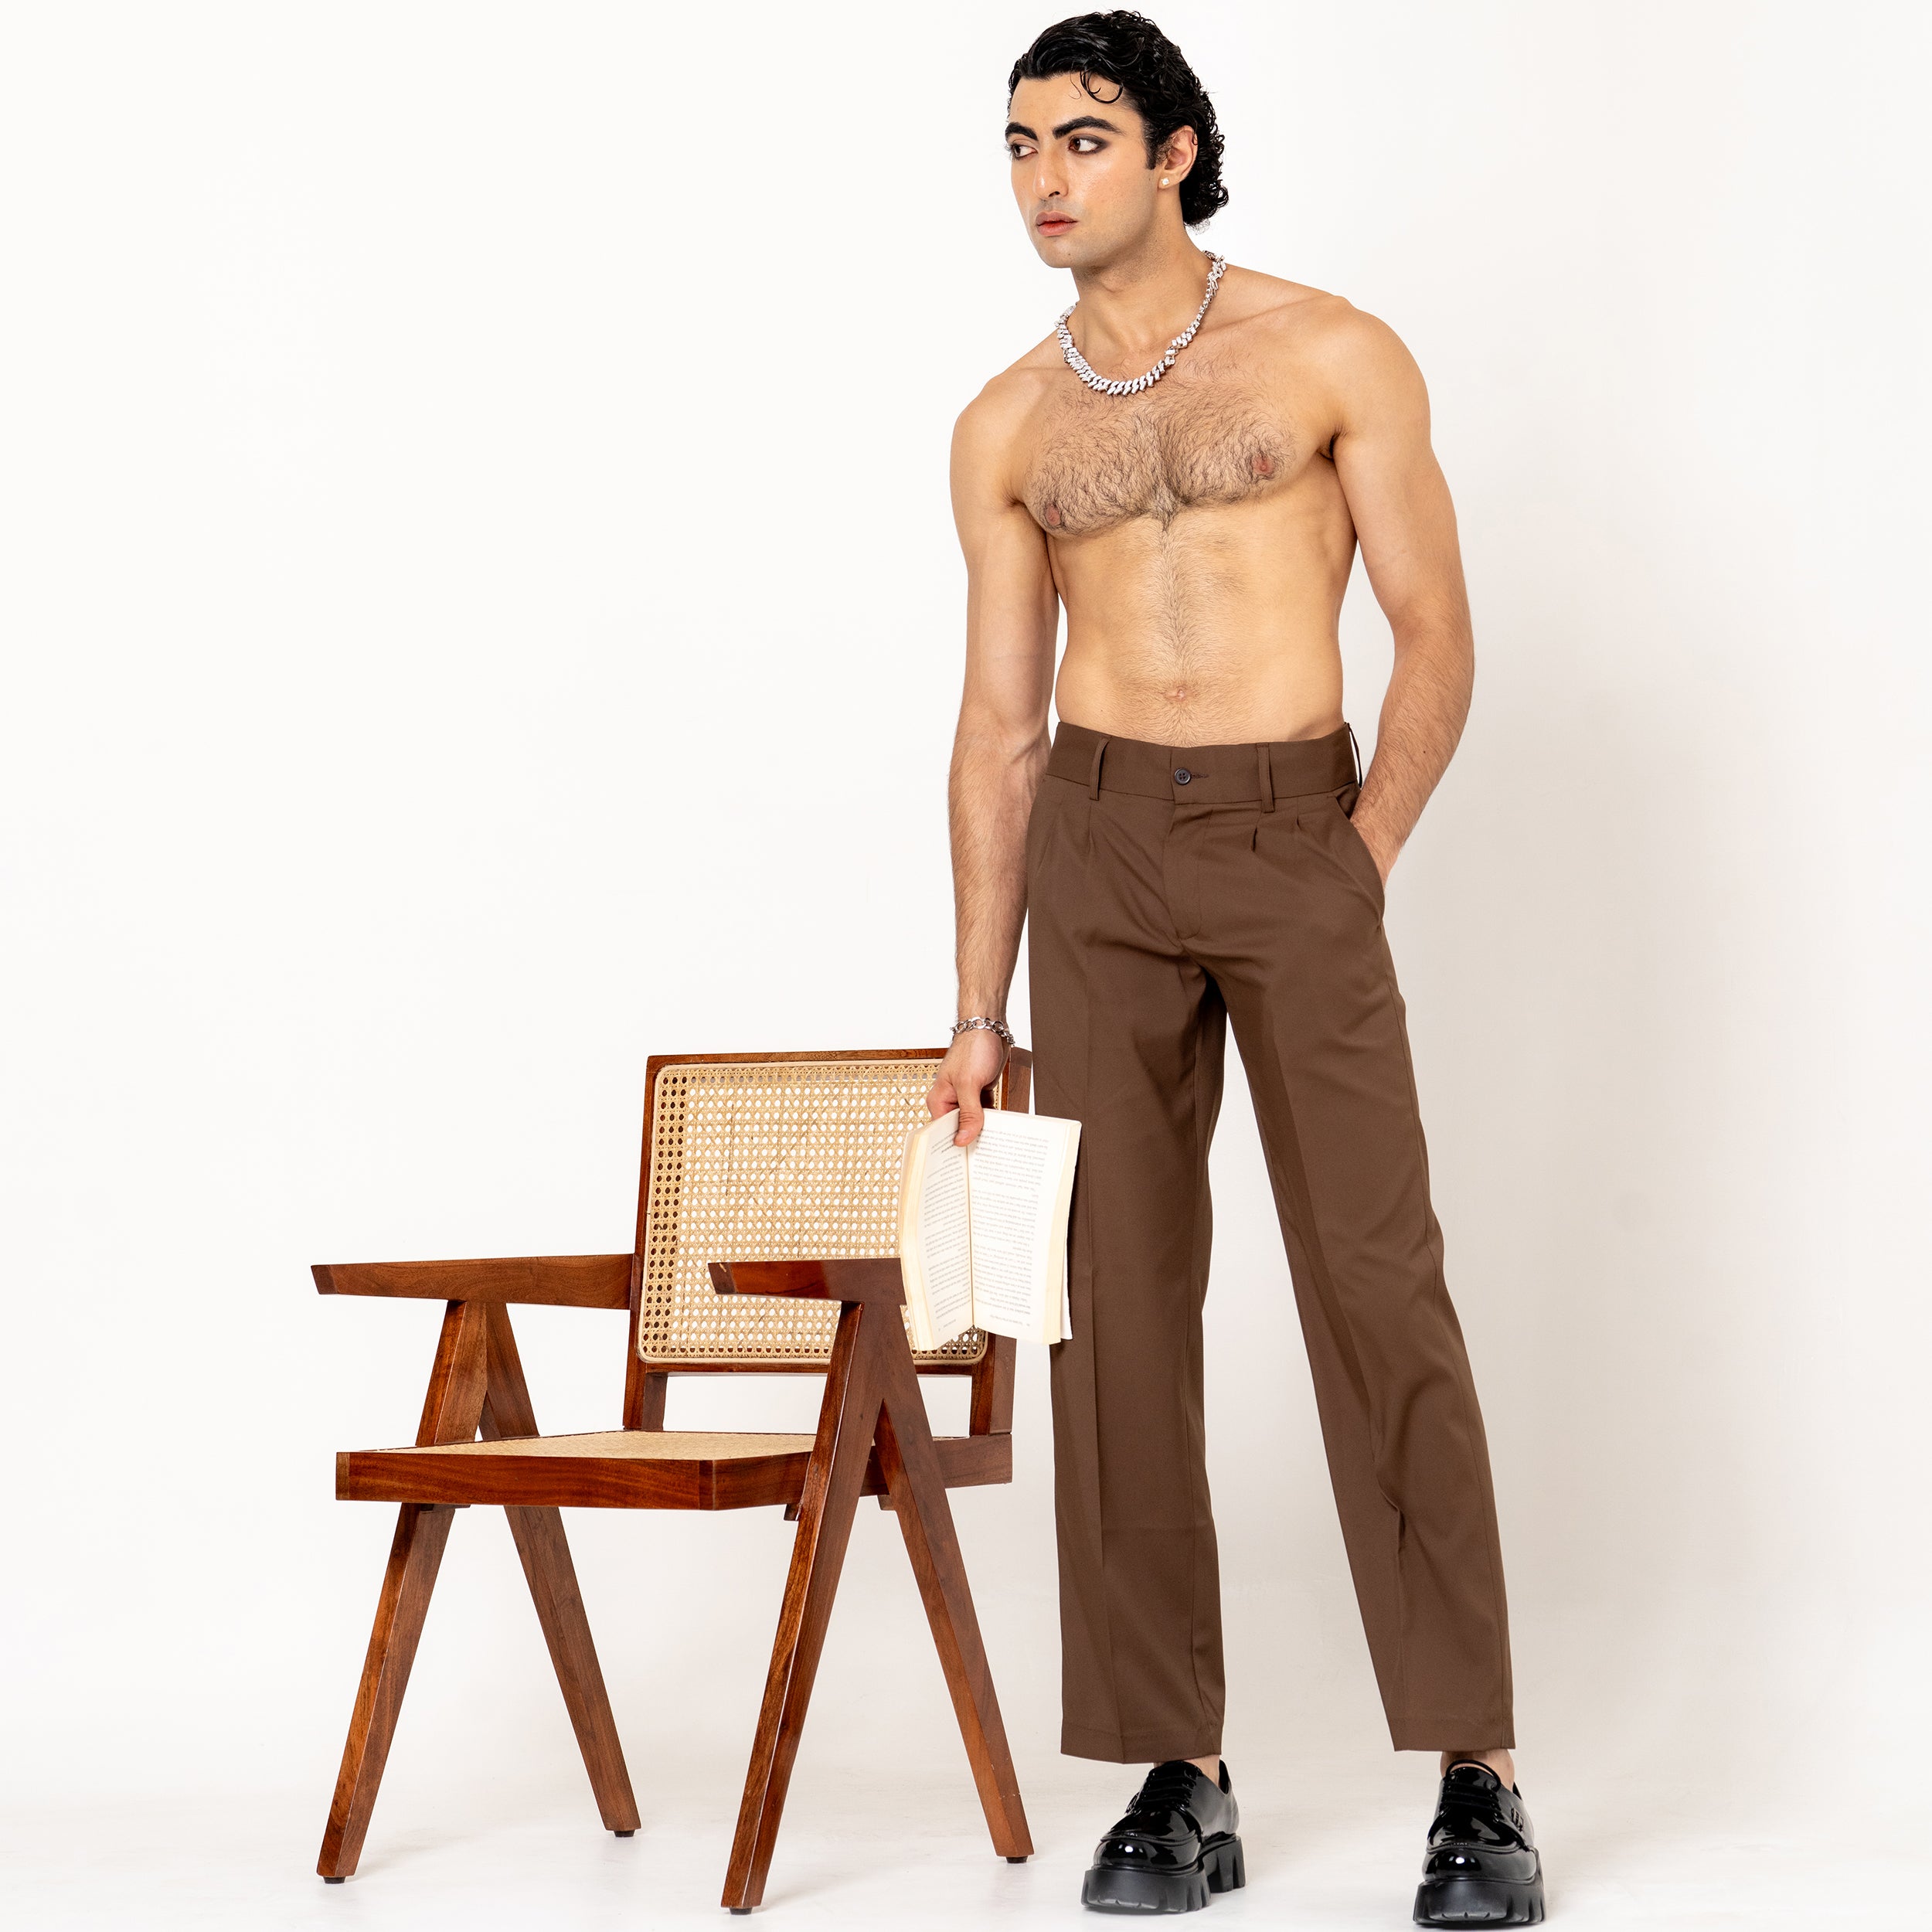 Double Pleated Brown Korean Pant